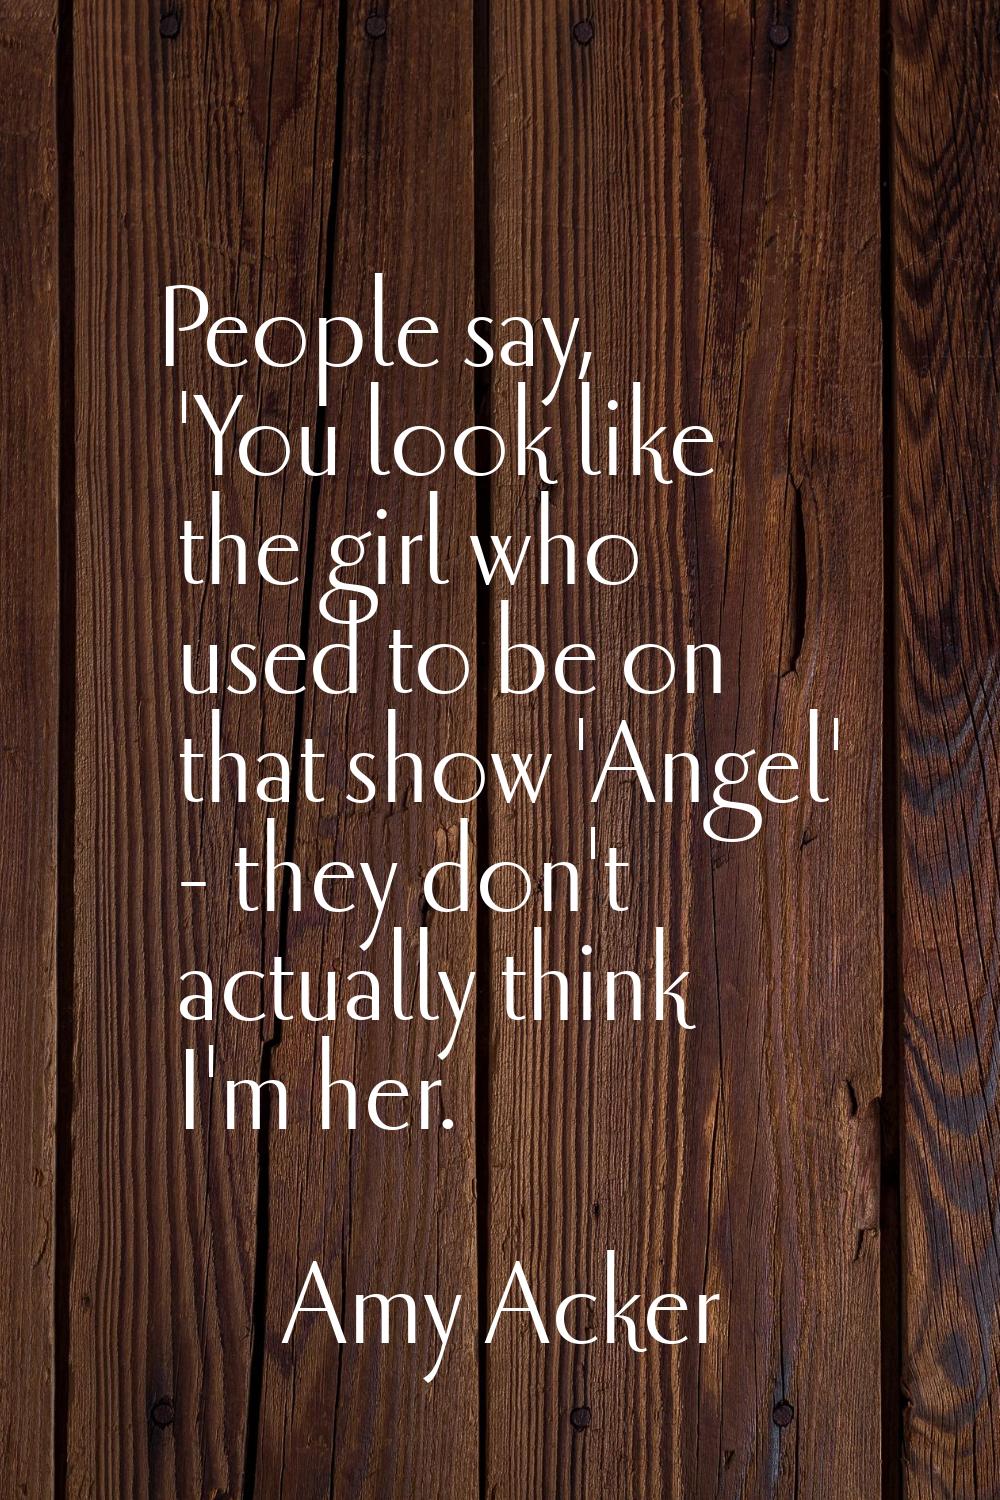 People say, 'You look like the girl who used to be on that show 'Angel' - they don't actually think